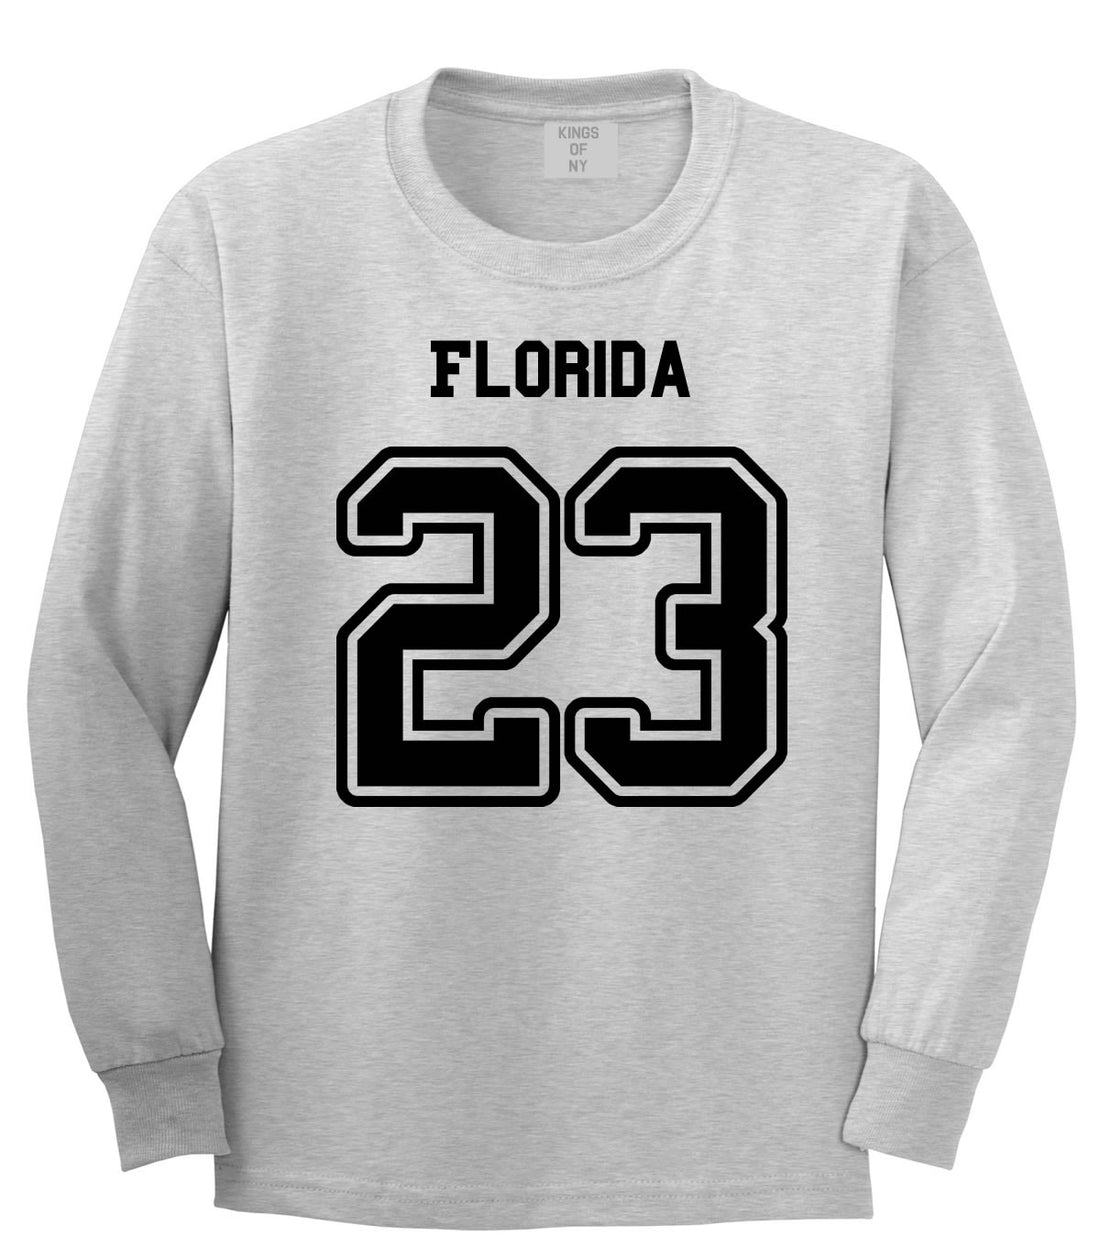 Sport Style Florida 23 Team State Jersey Long Sleeve T-Shirt By Kings Of NY